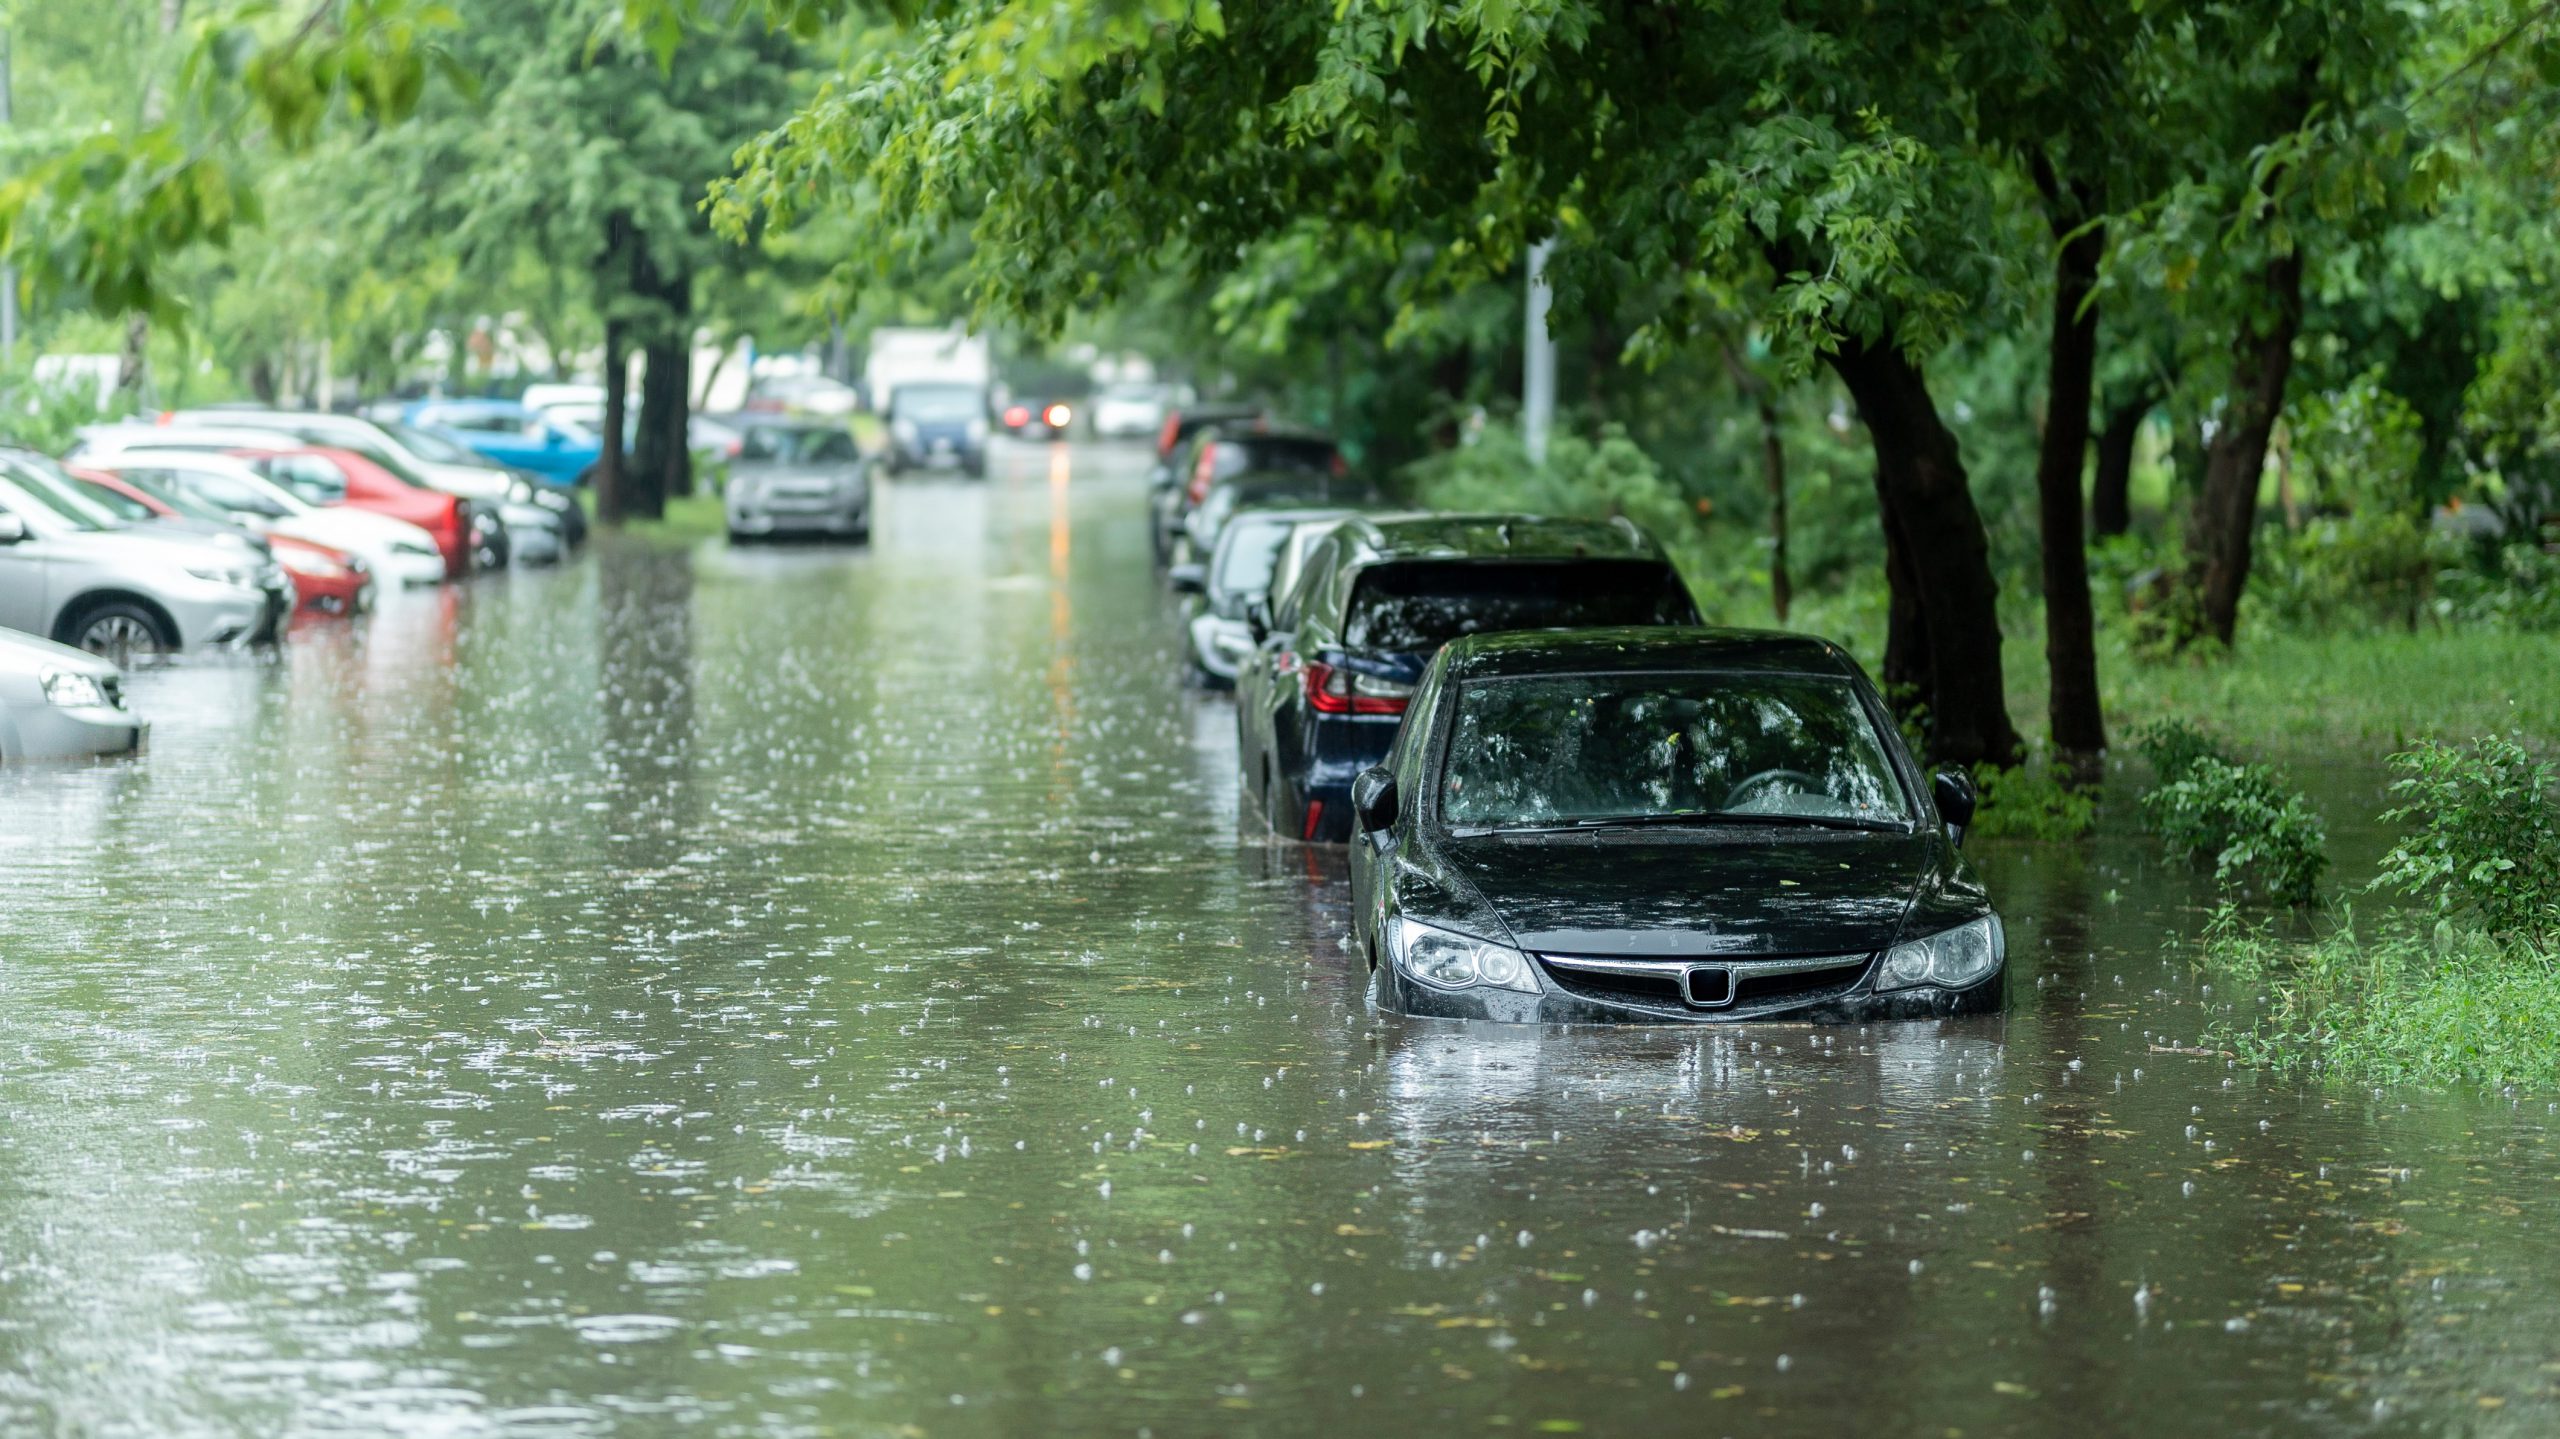 Half-flooded cars parked on the road during one of the london floods, caused by a break in the flood defences